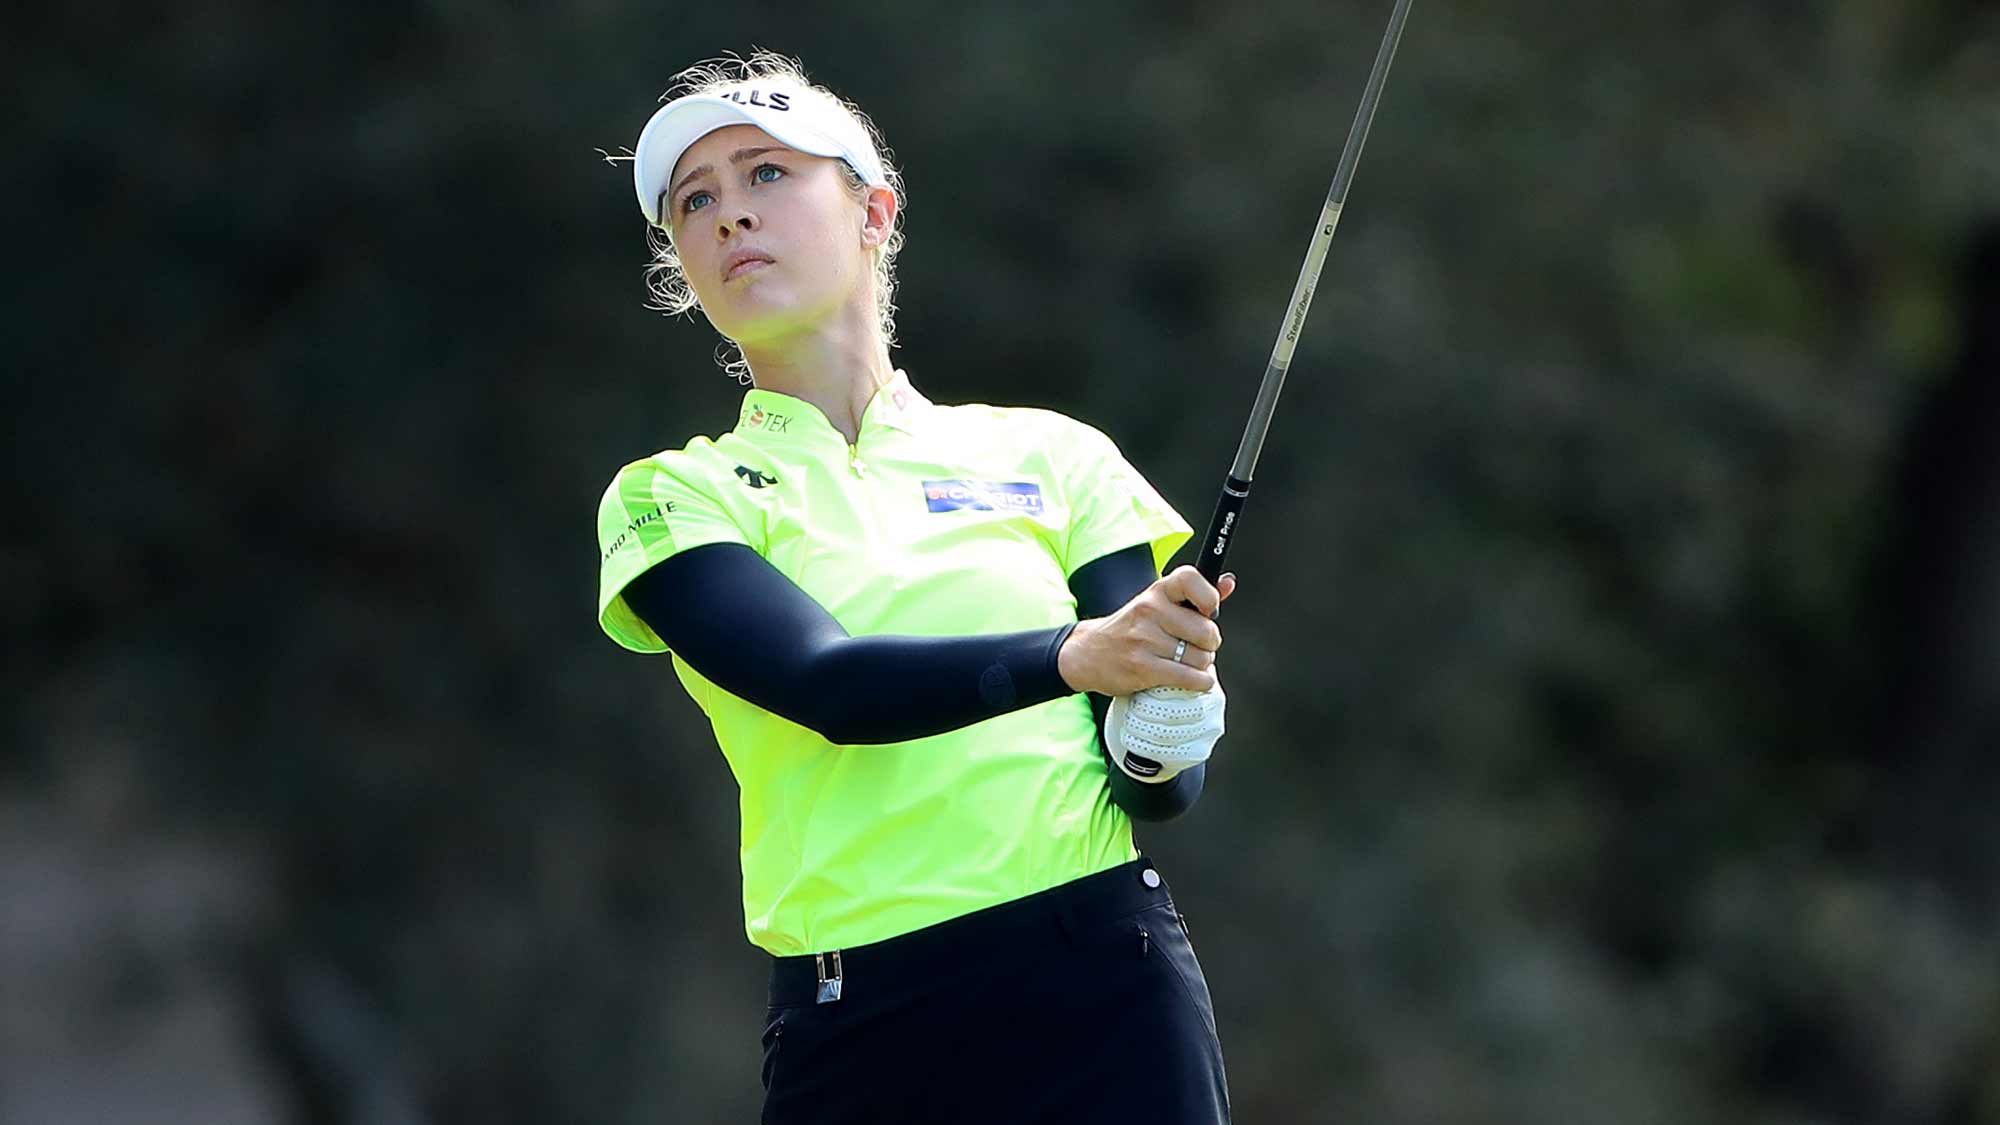  Nelly Korda plays a shot on the second hole during the third round of the CME Group Tour Championship at Tiburon Golf Club on November 23, 2019 in Naples, Florida